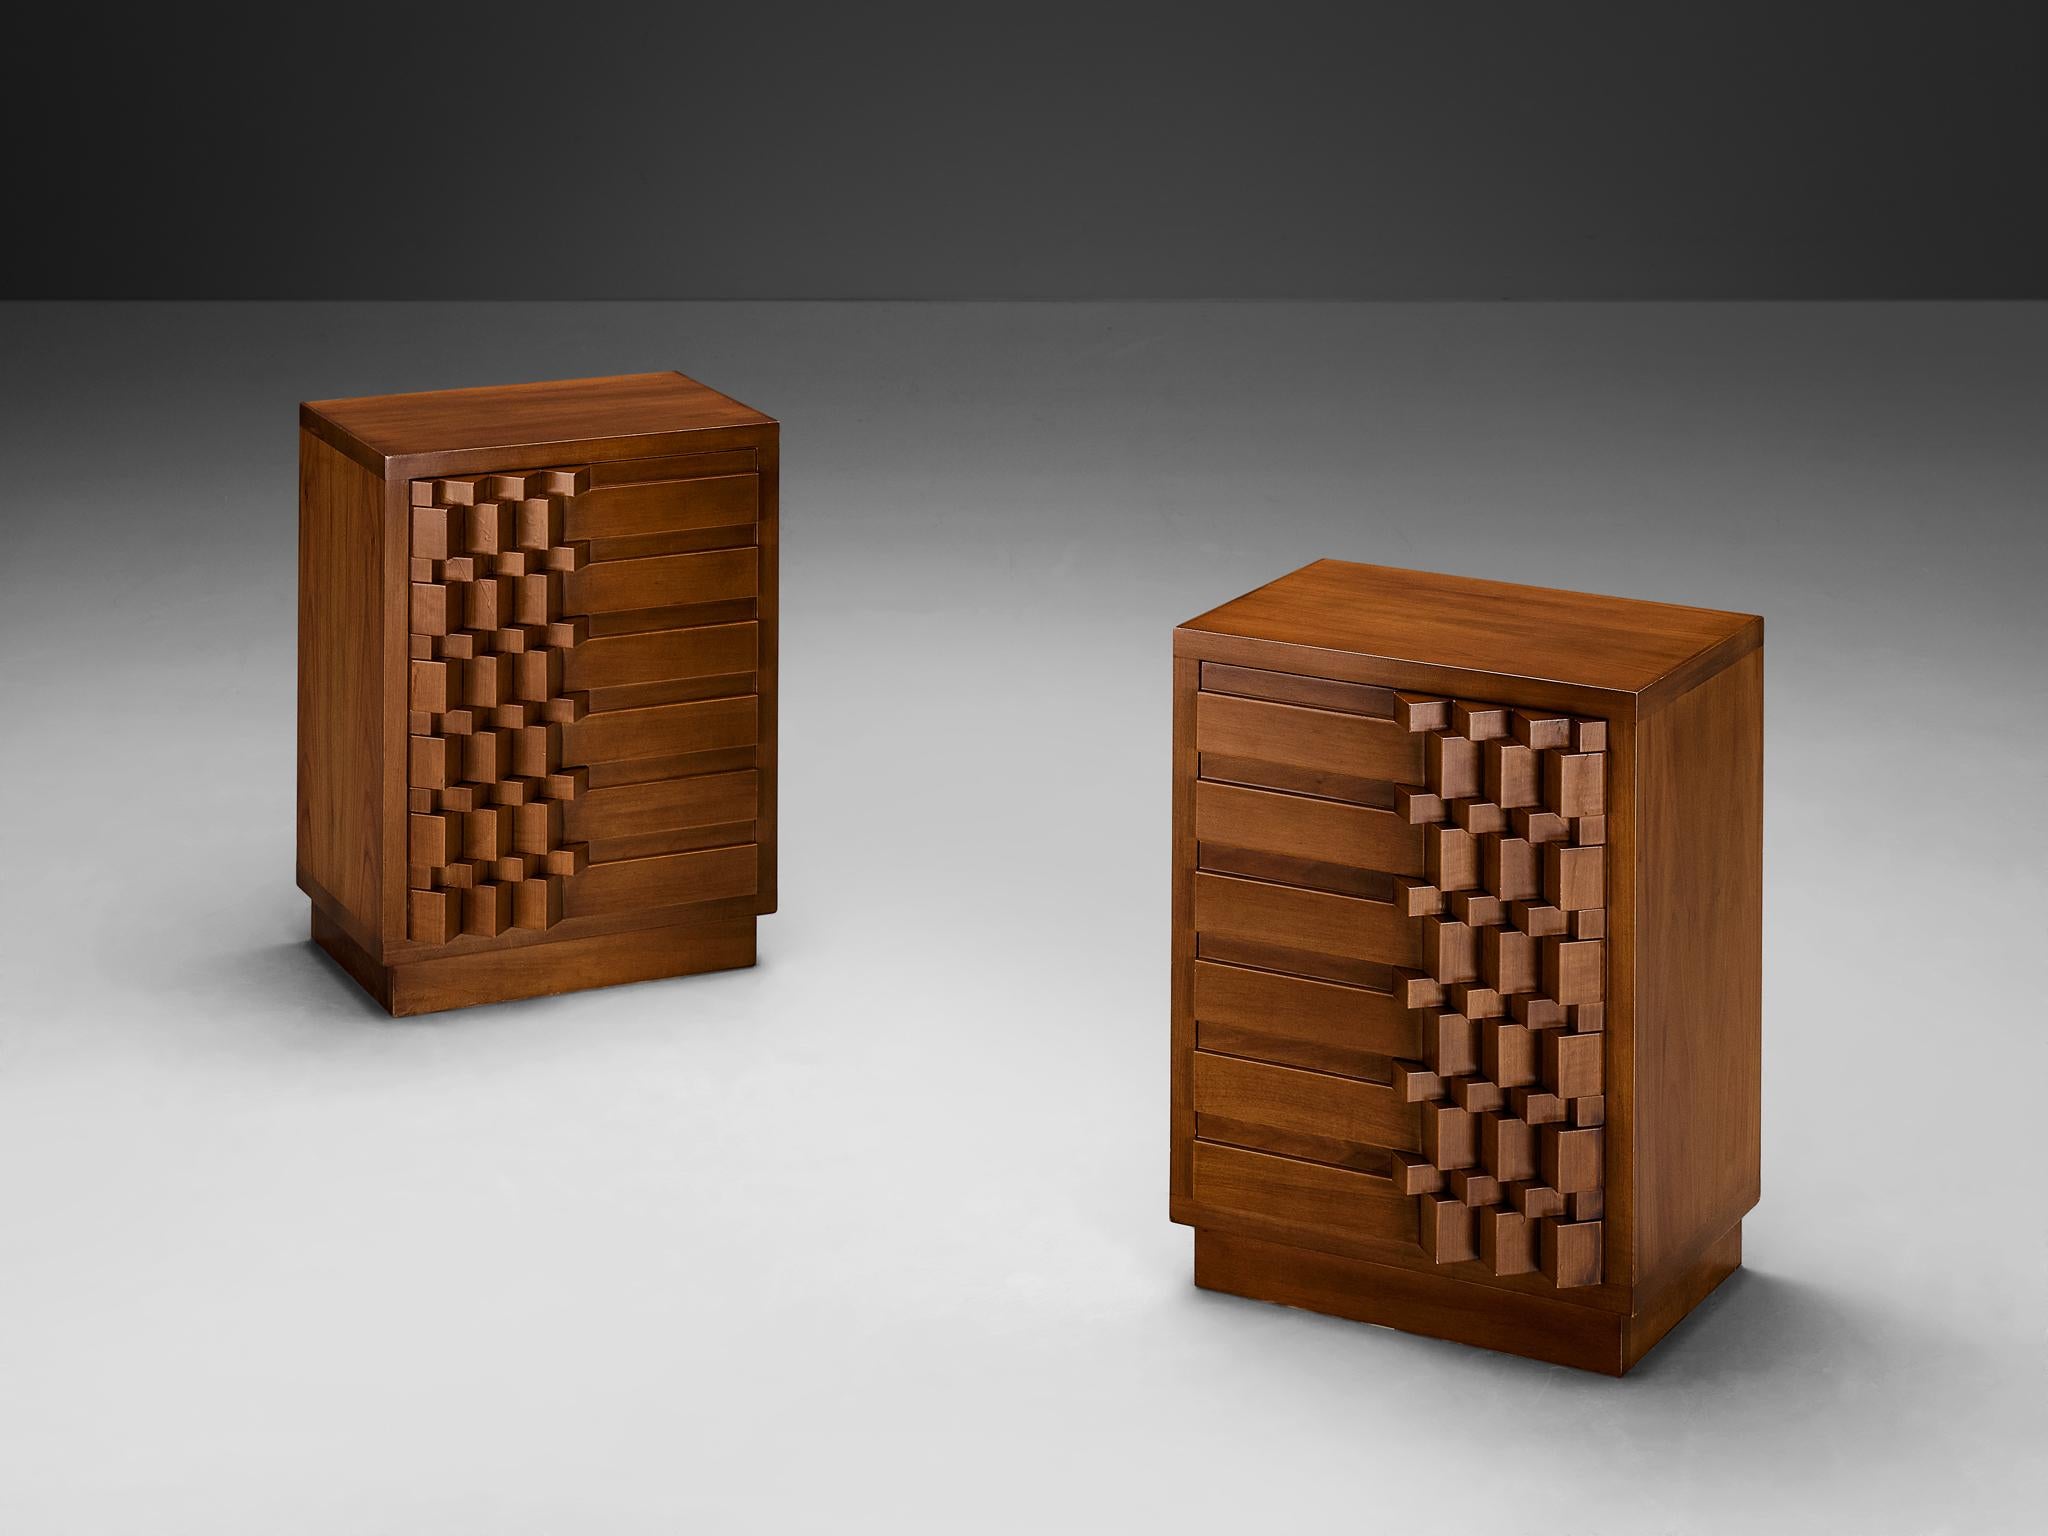 Luciano Frigerio, 'Diamante' nightstands, cherry, Italy, 1970s

This remarkable set of nightstands, created by the creative Italian designer Luciano Frigerio, exemplifies the aesthetic sensibilities that prevailed during the 1960s and -70s. The